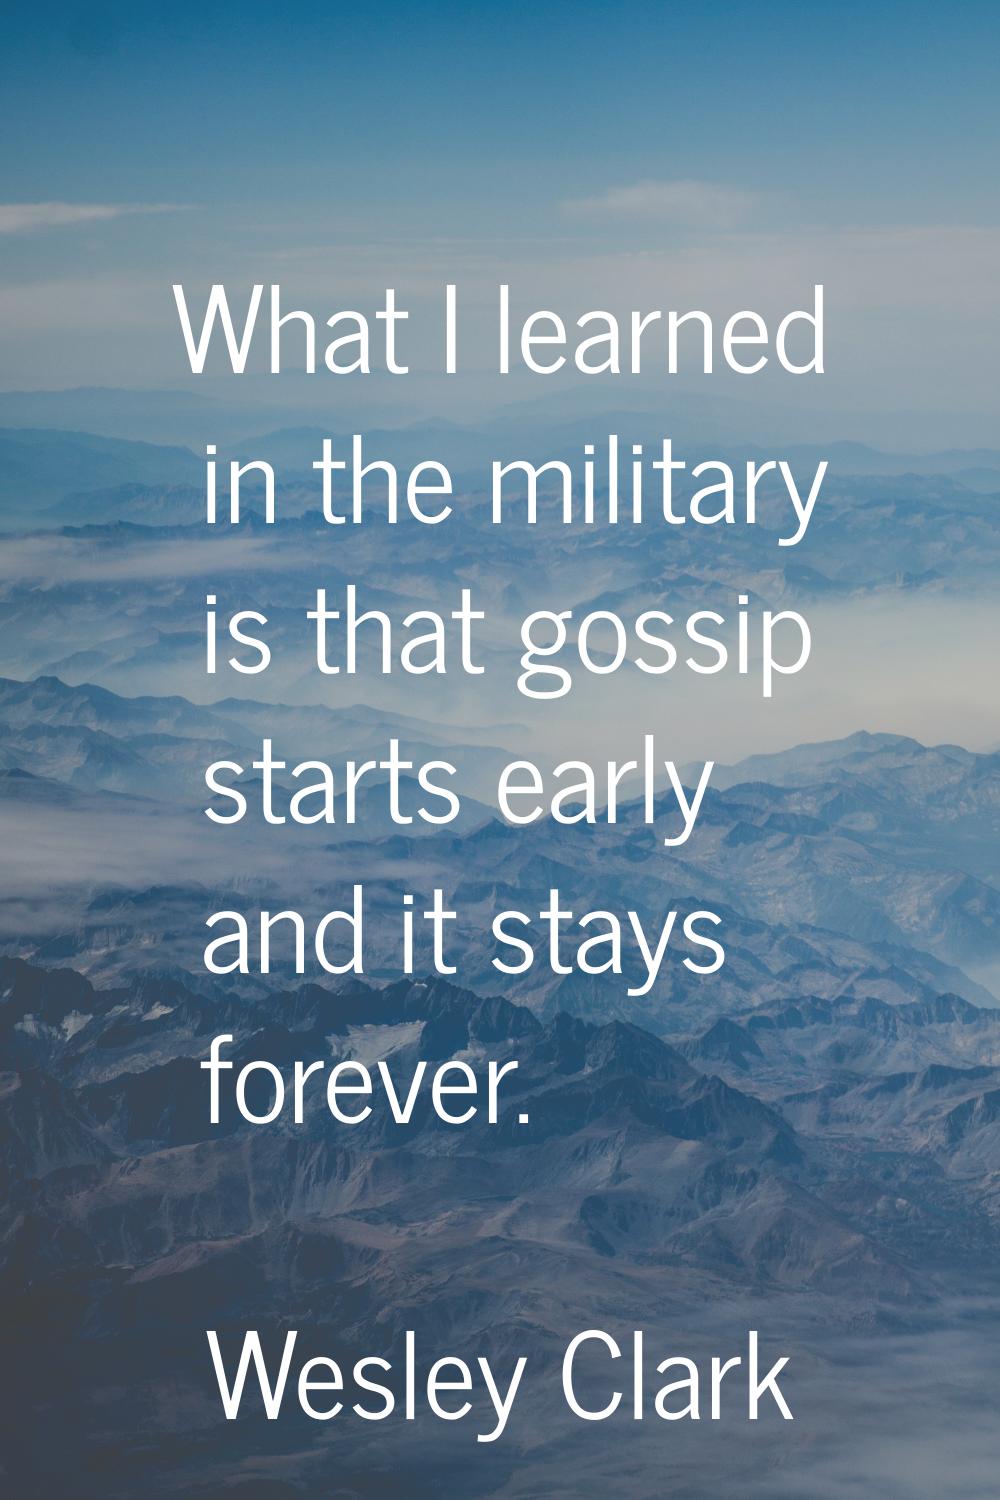 What I learned in the military is that gossip starts early and it stays forever.